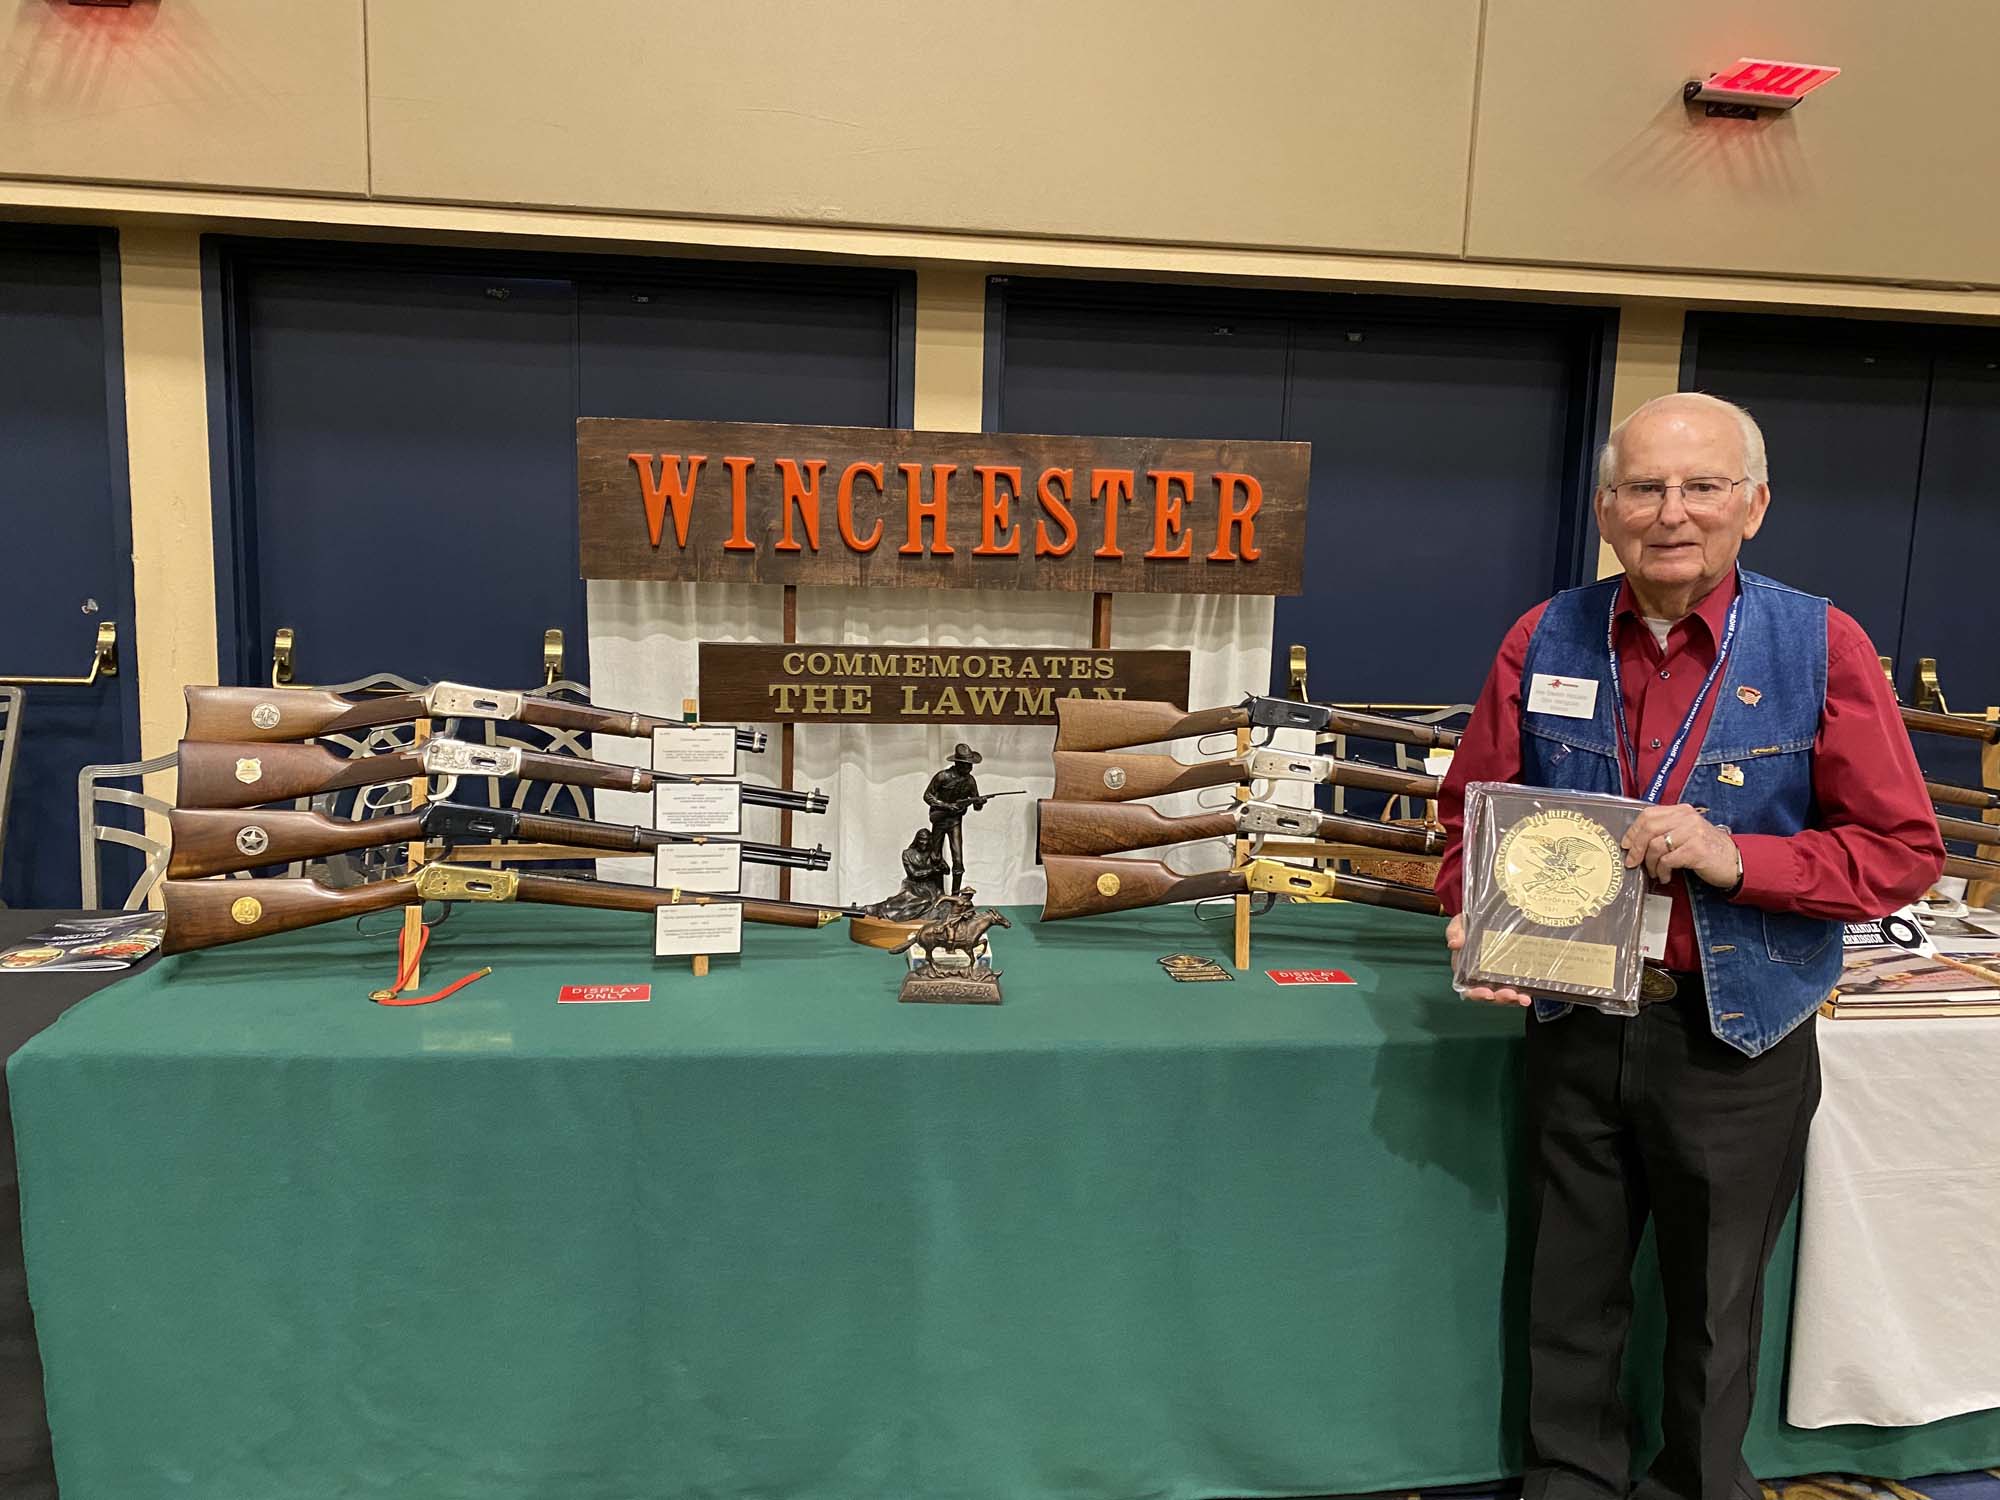 25th Annual NRA National Gun Collectors Show Awards - Donald Haringstad - Classic Arms Outstanding Exhibit Award